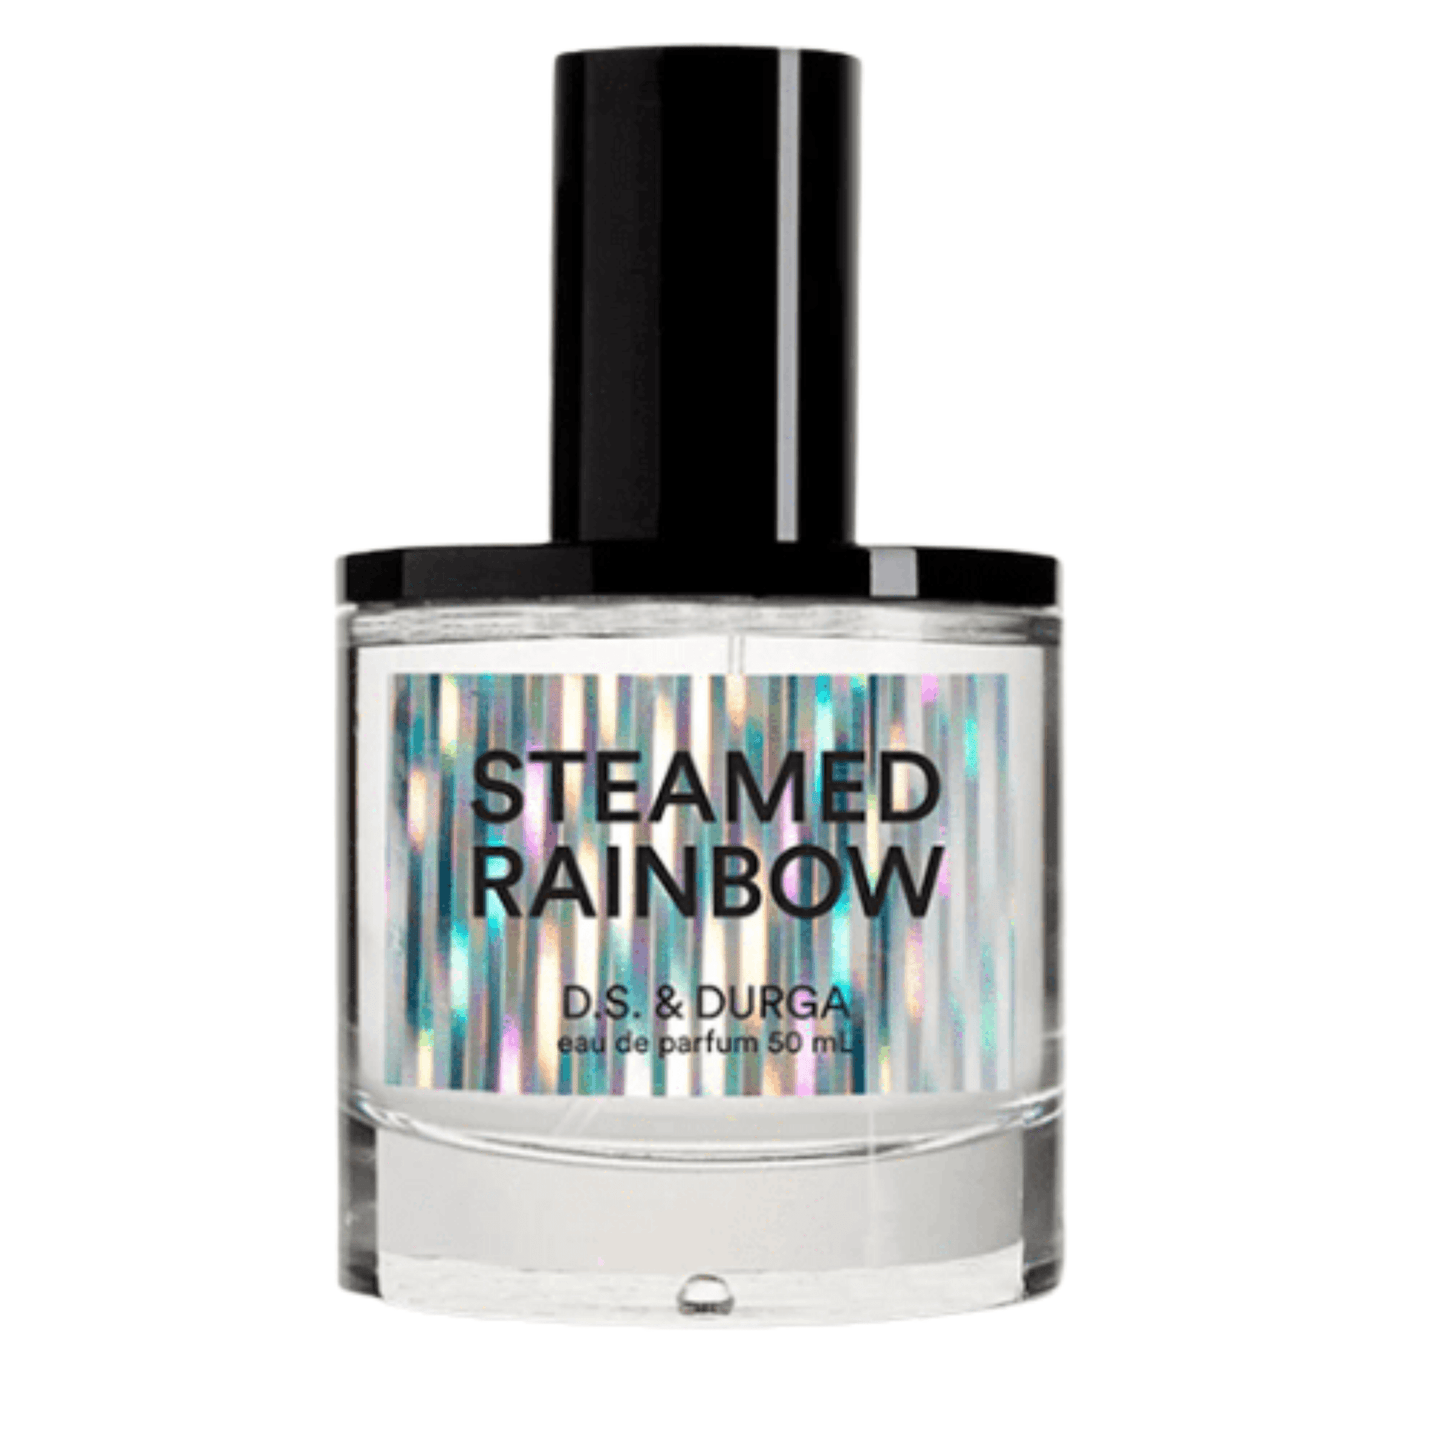 Primary Image of Steamed Rainbow EDP